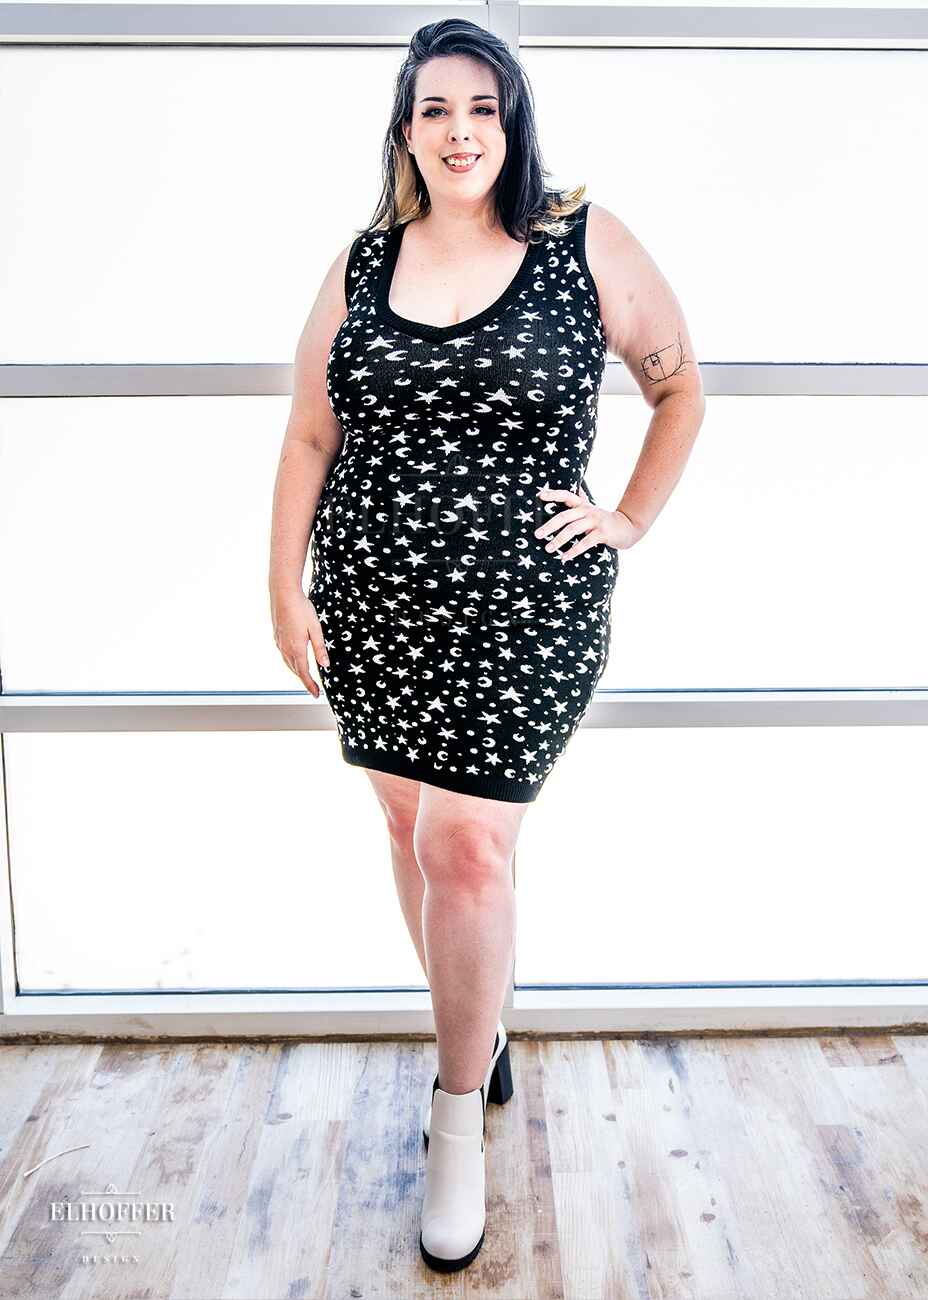 Katie Lynn, a fair skinned 2xl model with black and white hair, is wearing a black fitted knee length knit bodycon dress with a white star and moon pattern and a deep v neckline.